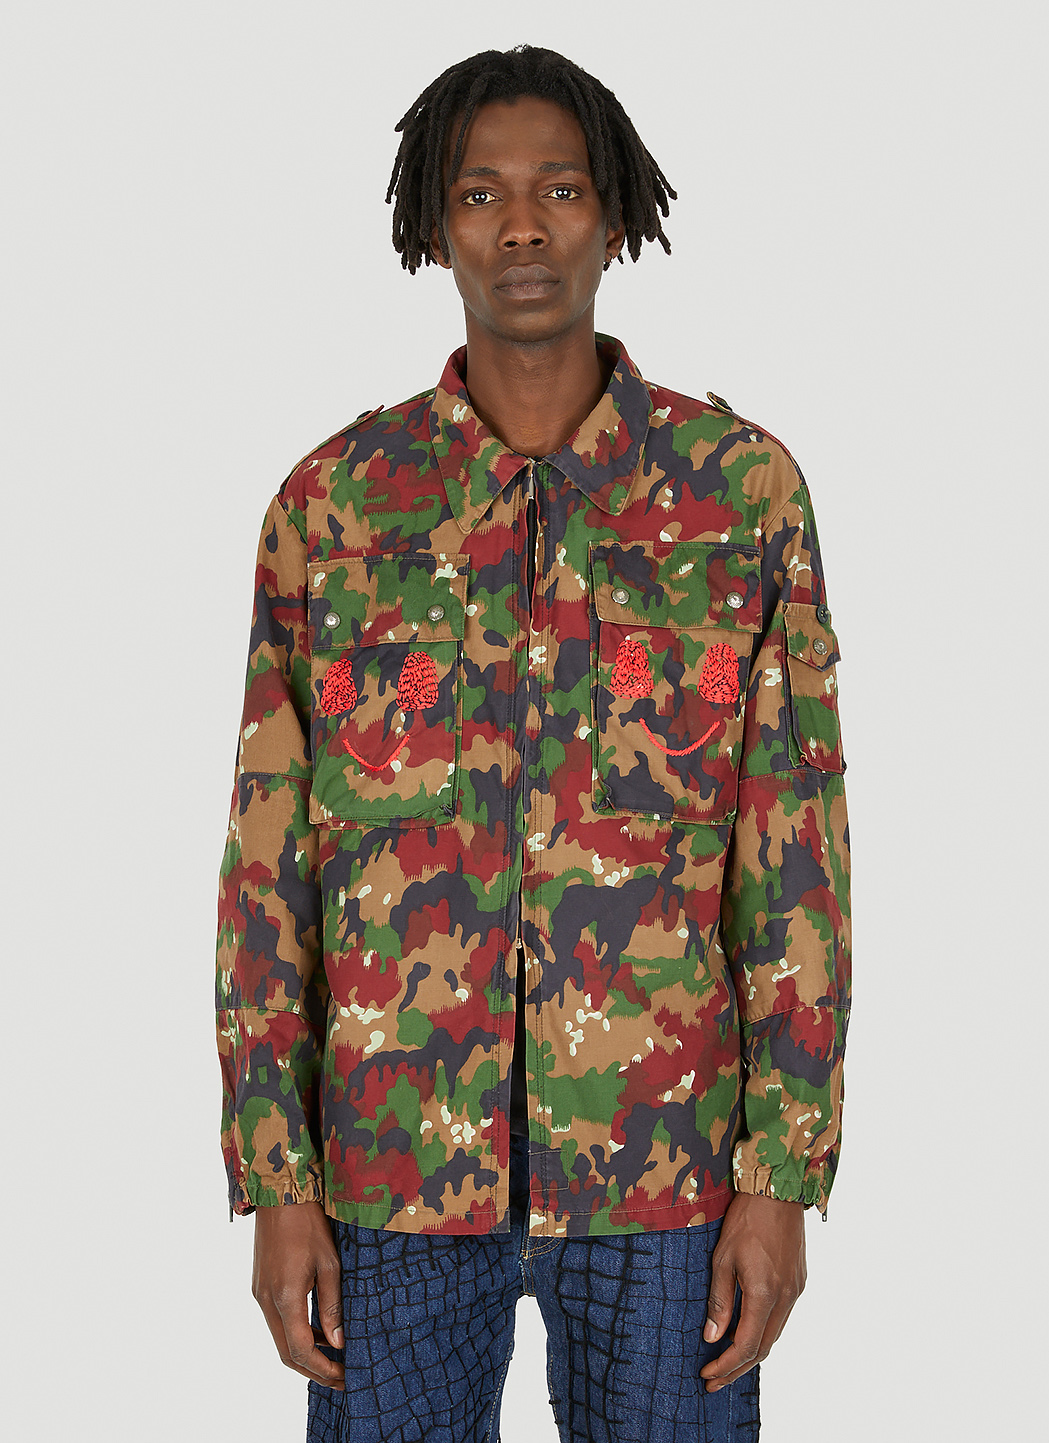 Embroidered Military Jacket